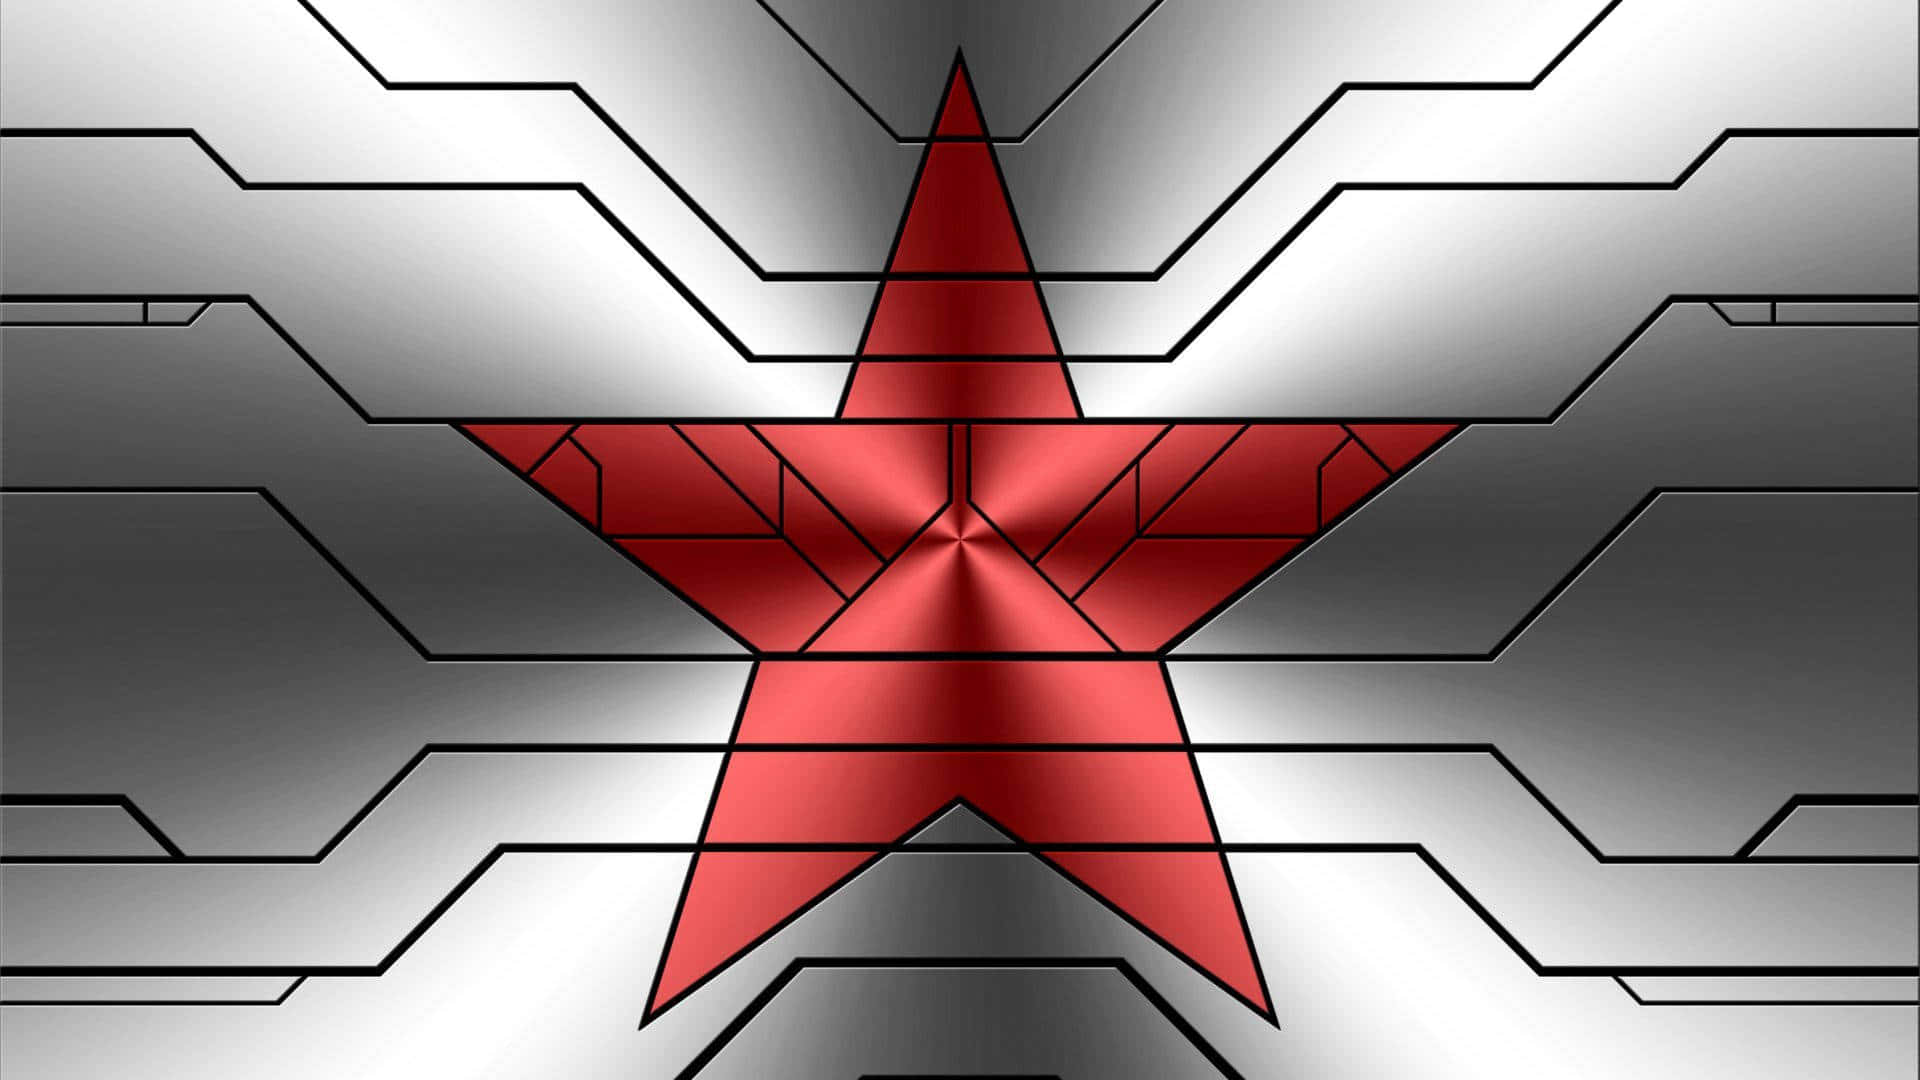 A bright red star glowing against a dark background